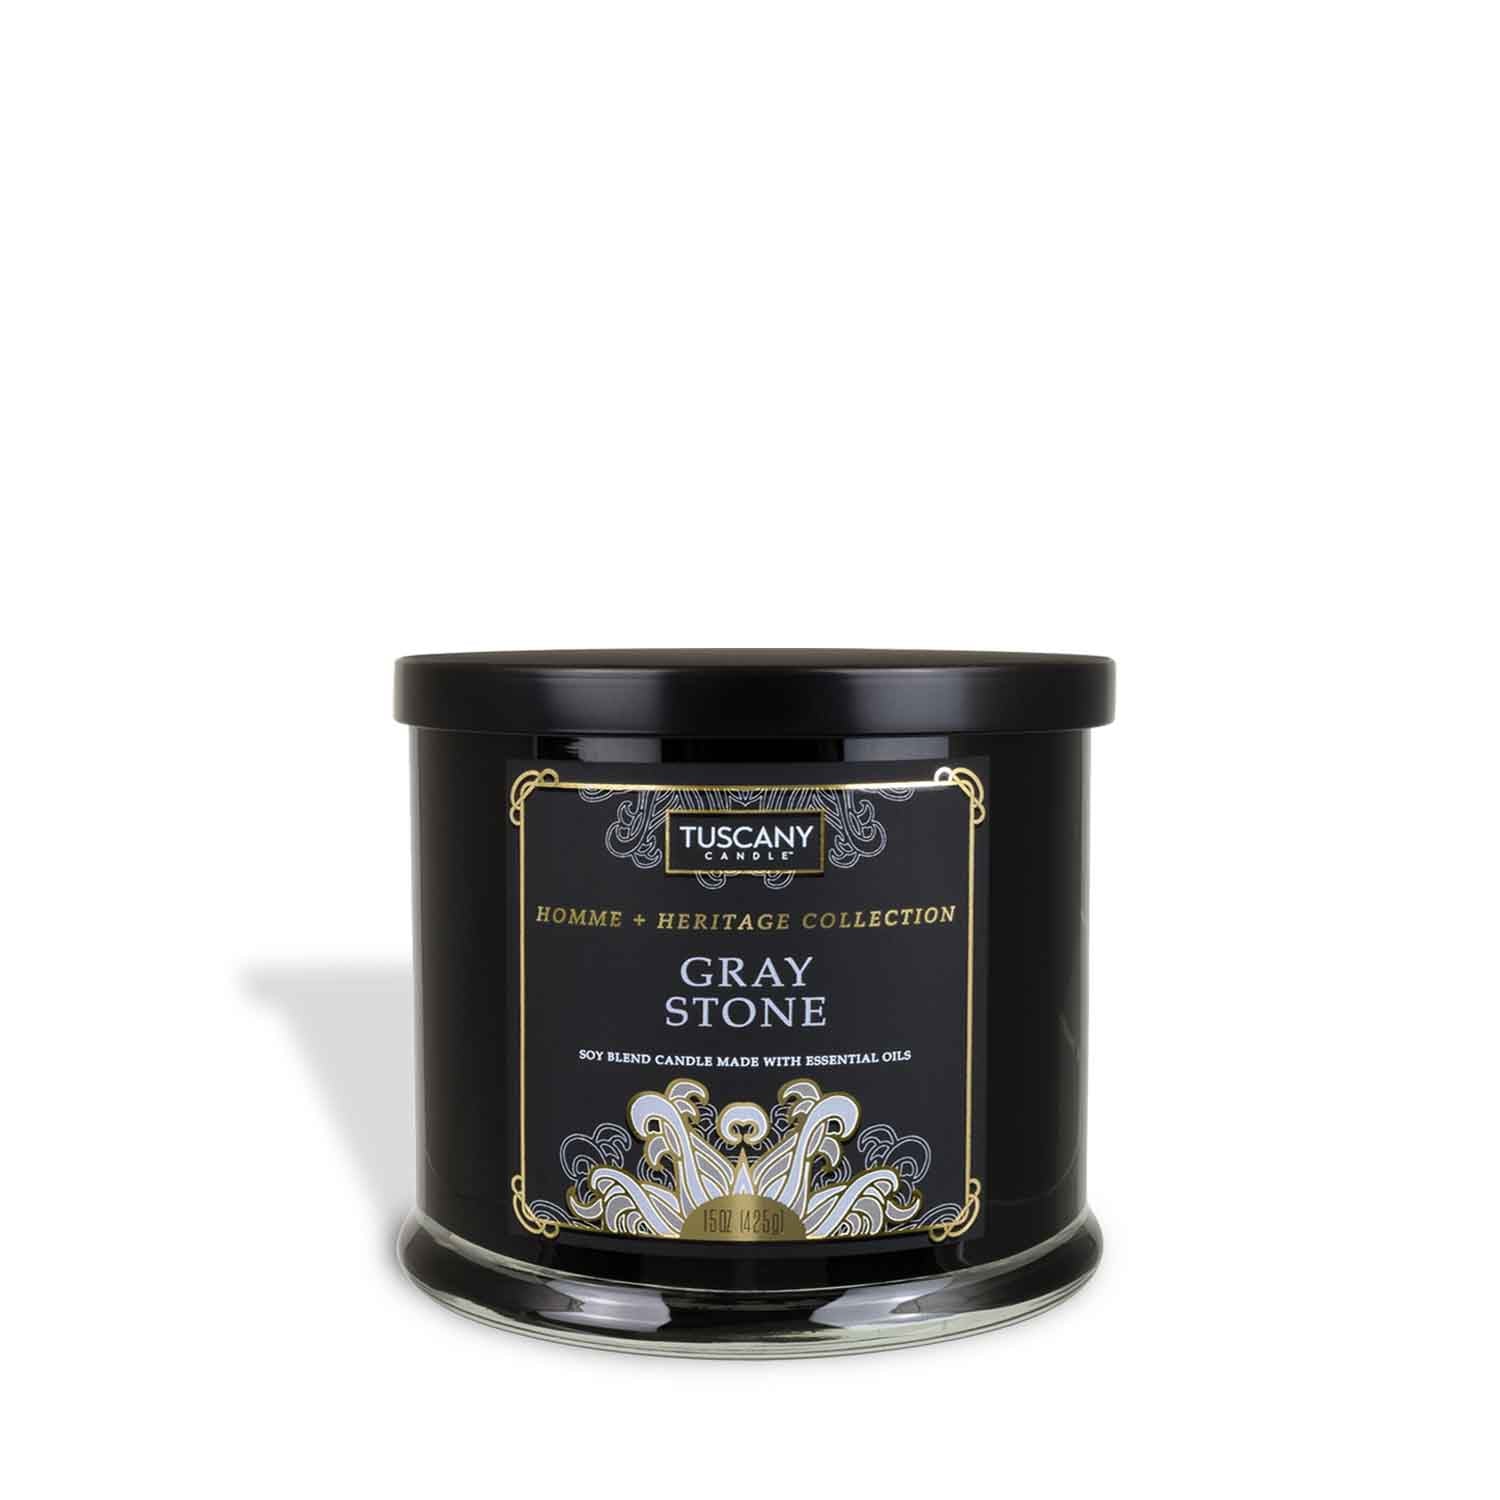 A Gray Stone scented jar candle (15 oz) from the Homme + Heritage collection by Tuscany Candle, featuring essential oils and fragrant notes, placed on a clean white background.